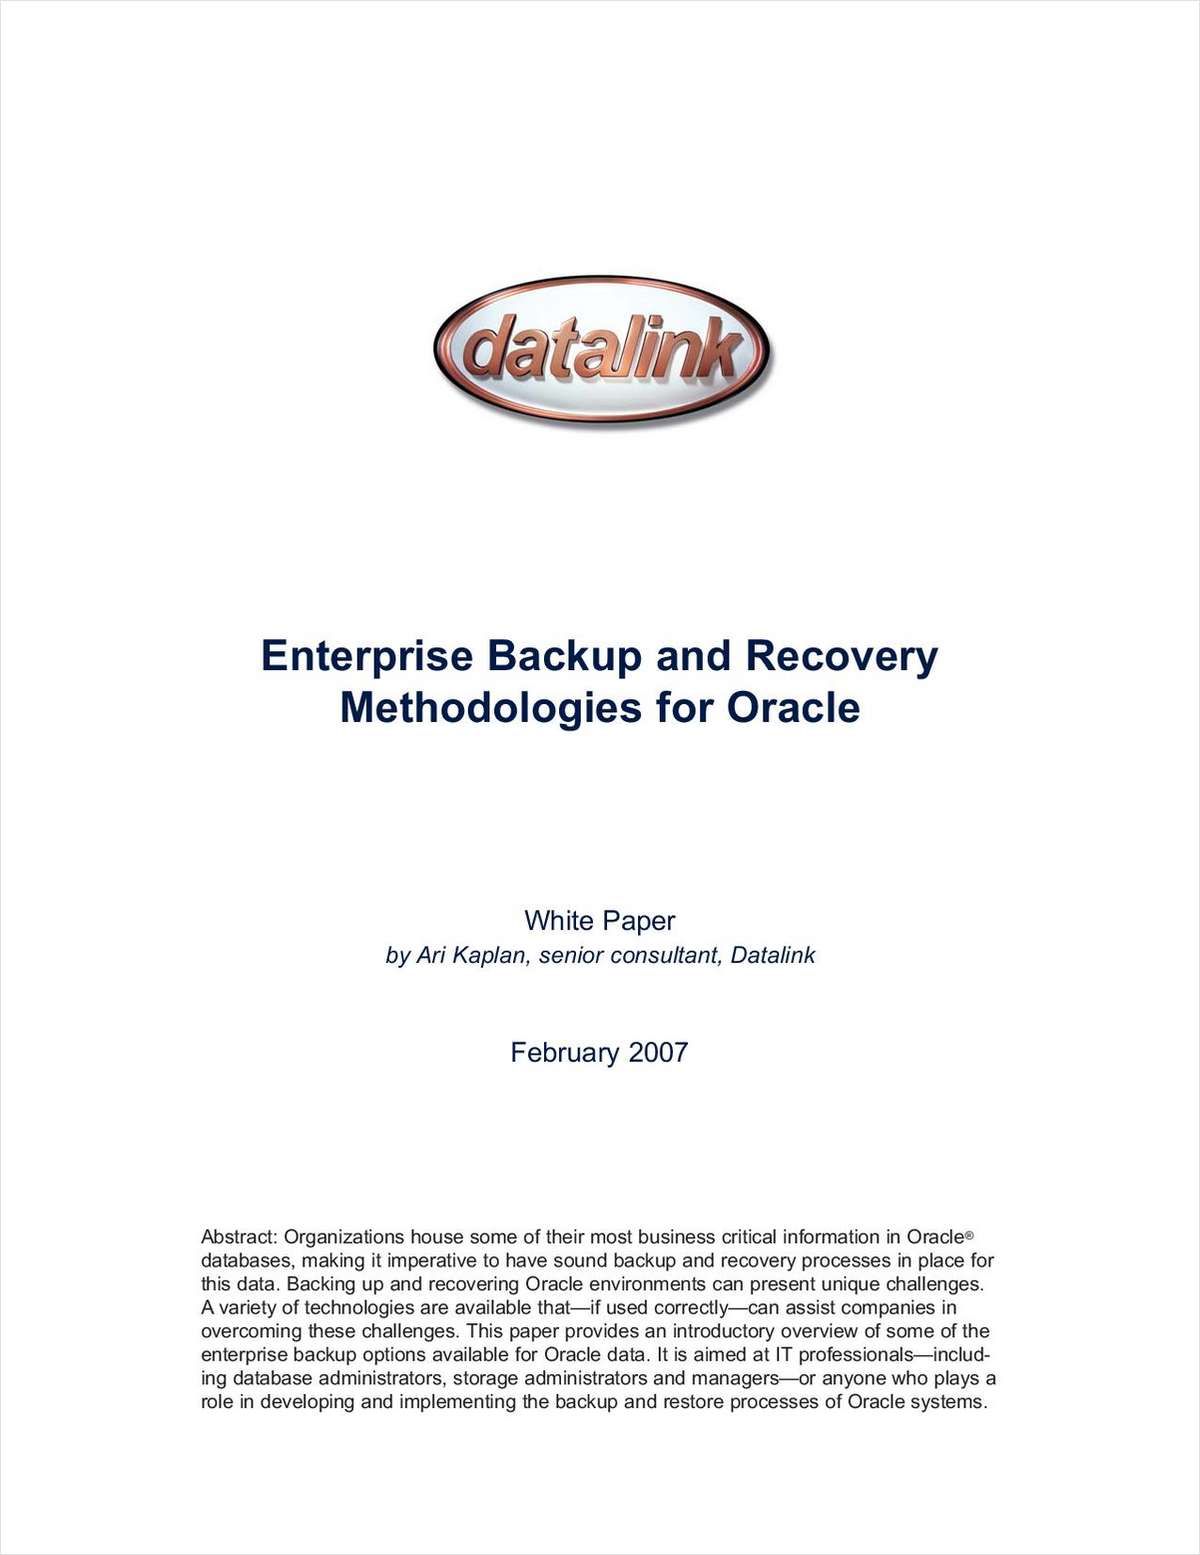 Enterprise Backup and Recovery Methodologies for Oracle